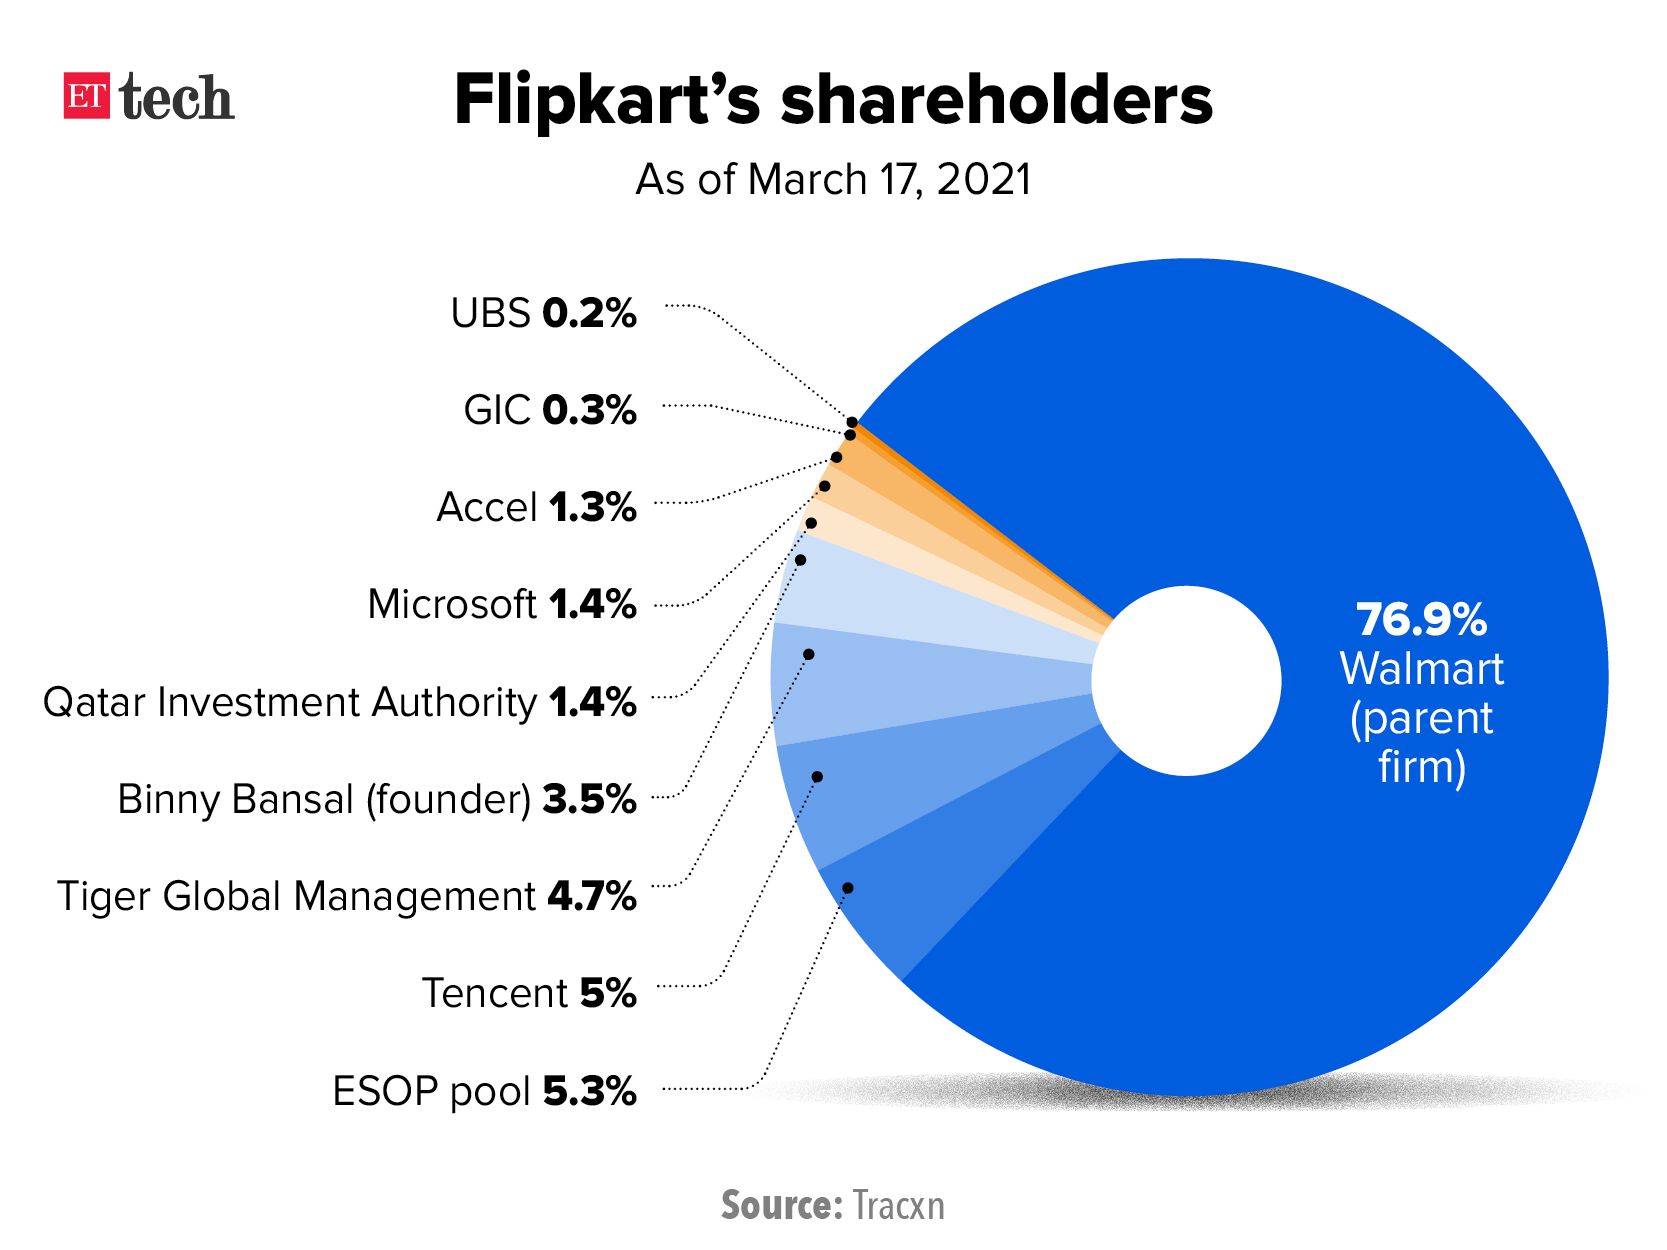 Flipkart Is In Talks With Several Investors Including SoftBank, To